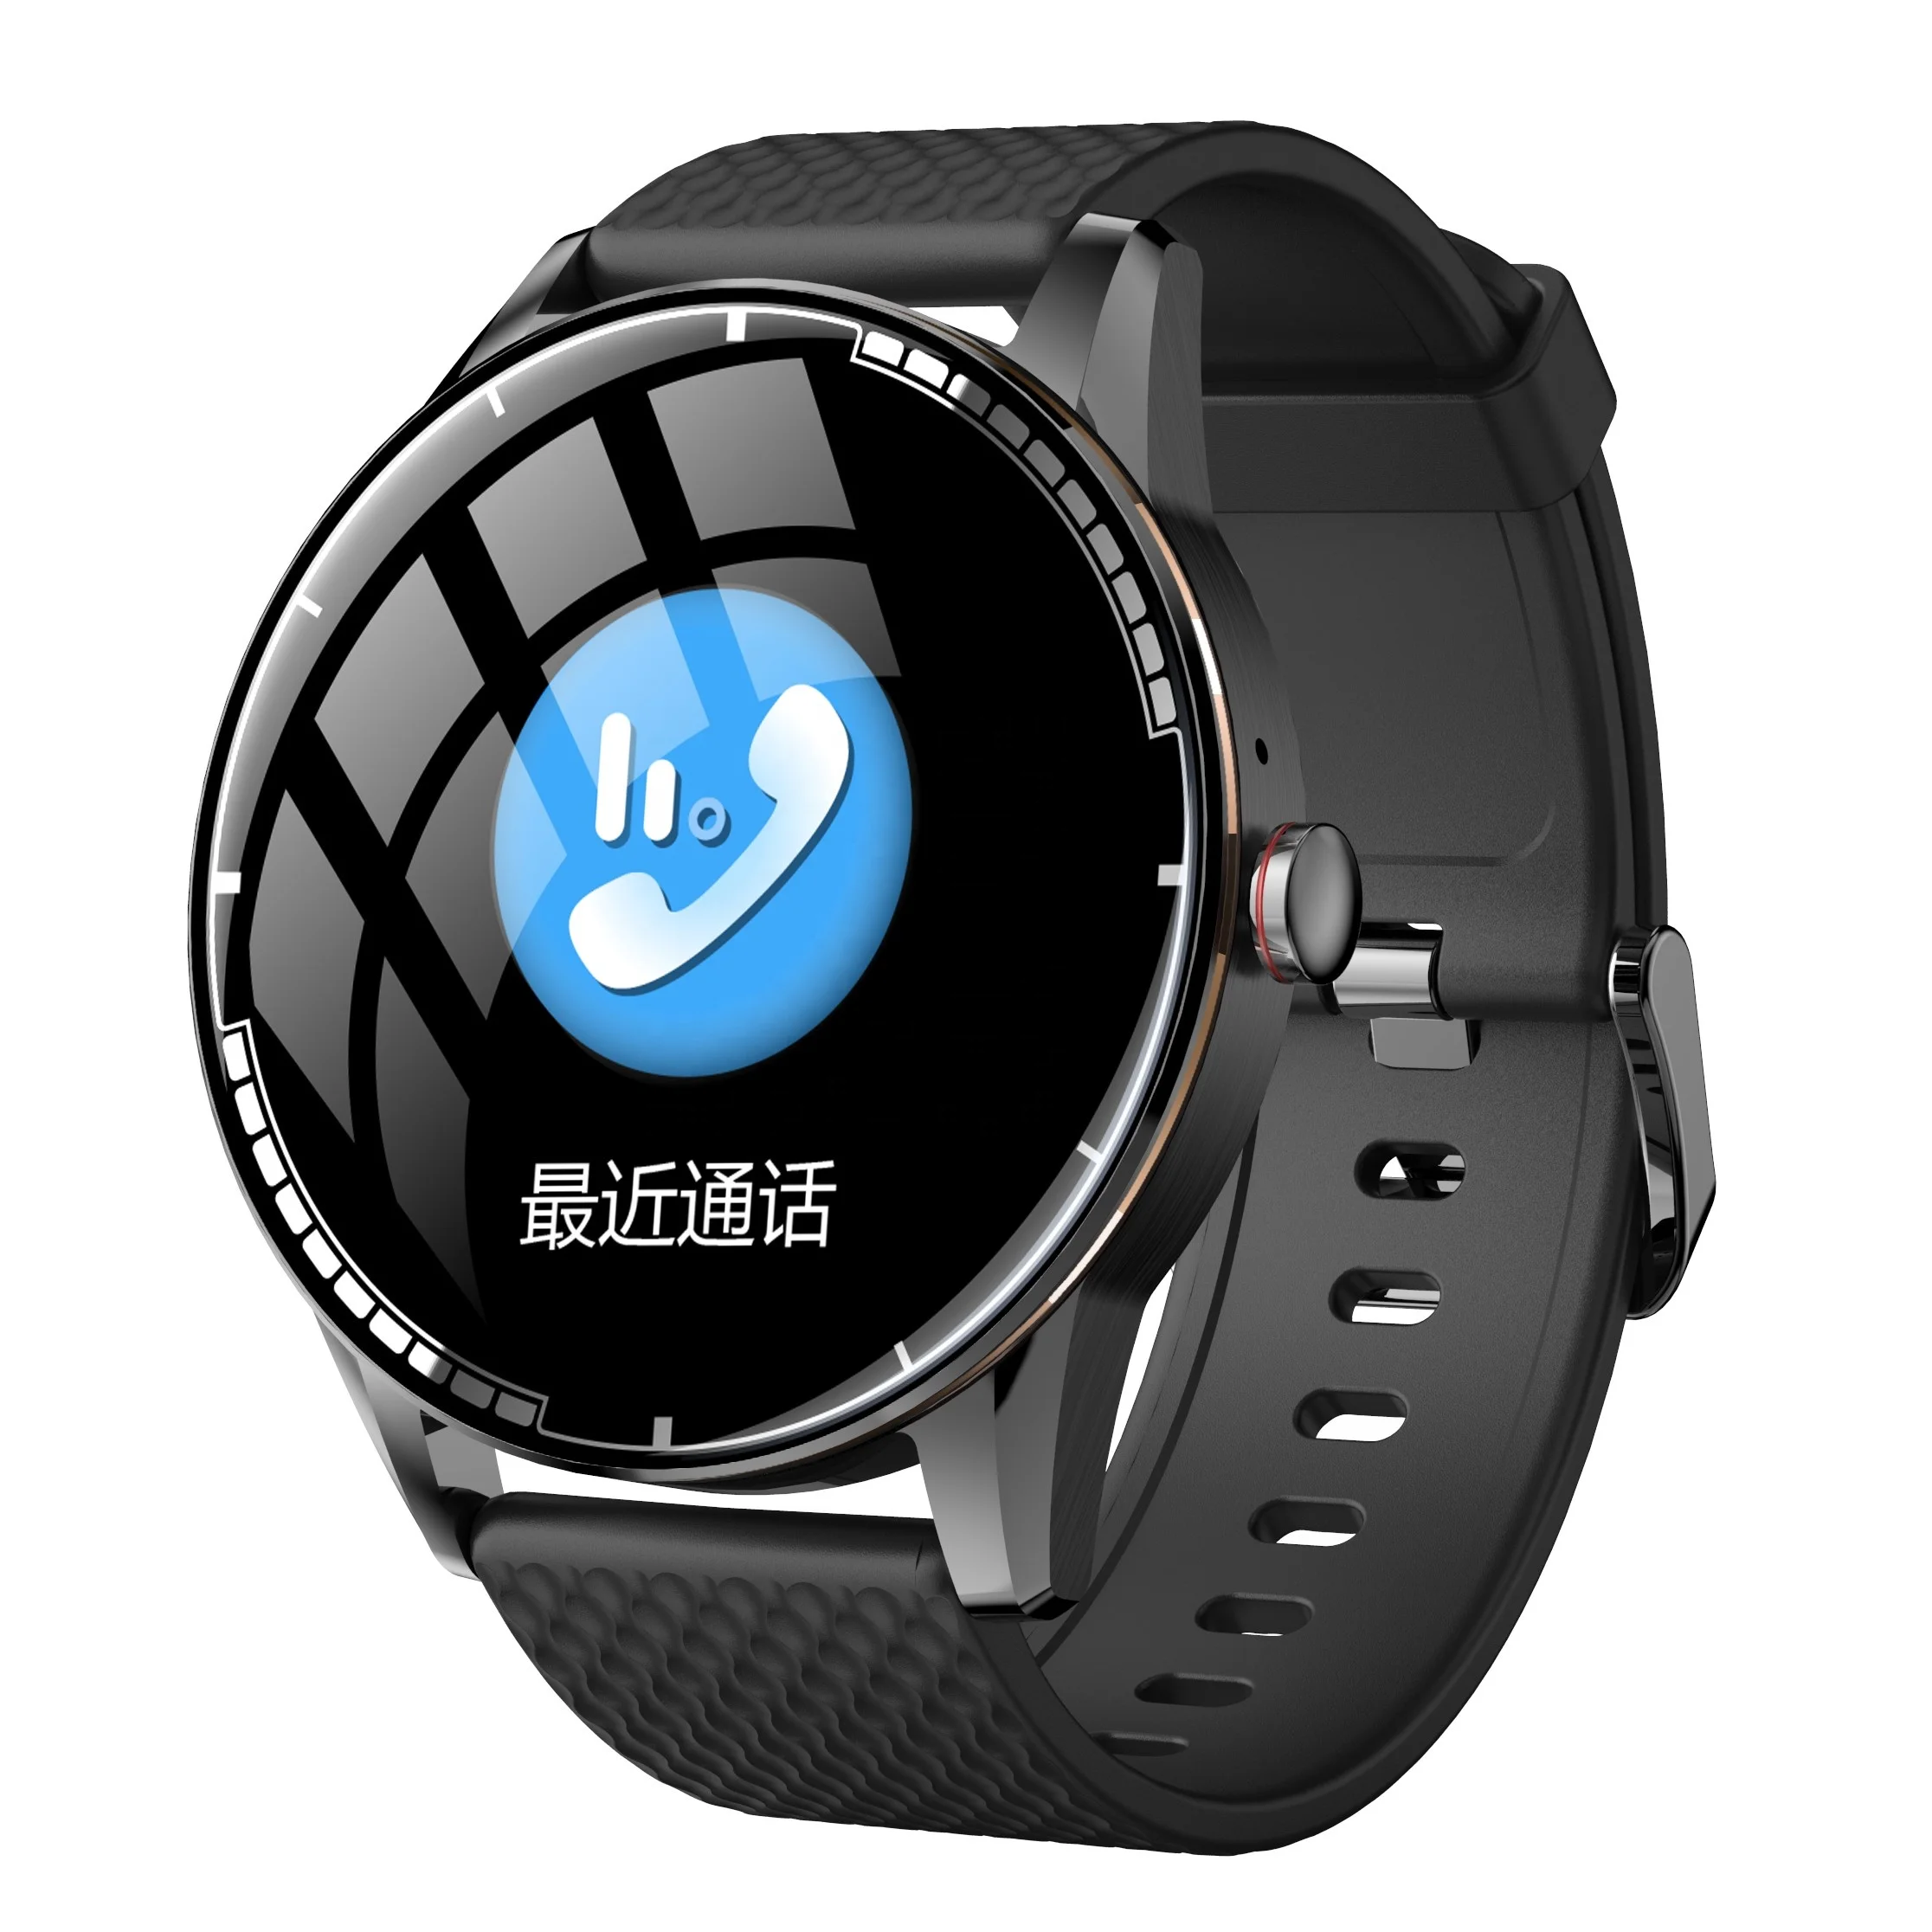 

H6 Round Touch Sports Smartwatch Waterproof Mens IOS/Android BT Speaker Headset Answering Phone Music Fashion Smart Watch